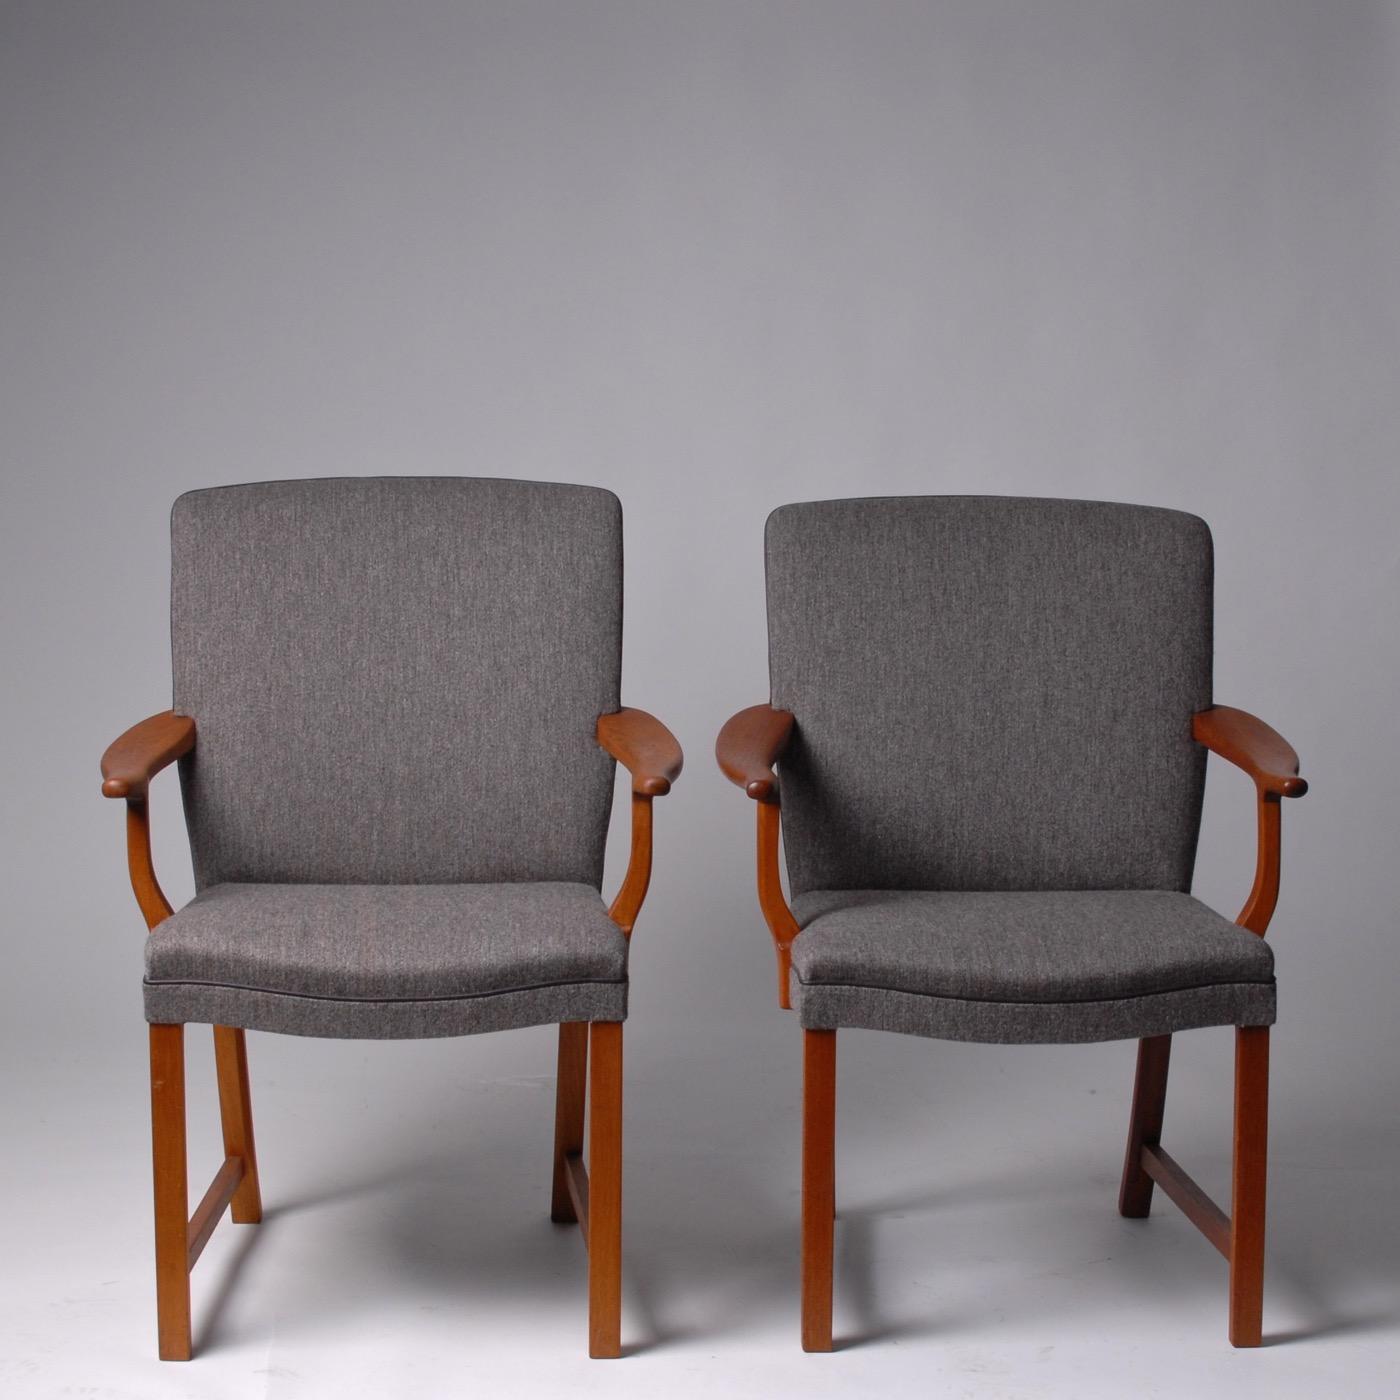 Scandinavian Modern Alf Sture armchairs teak and wool, Norway, 1950.
Armchairs in deep colored grain teak wood designed by Norwegian Architect Alf Sture in the 1950s. Advanced craftsmanship upholstery with blended color gray wool from Kvadrat